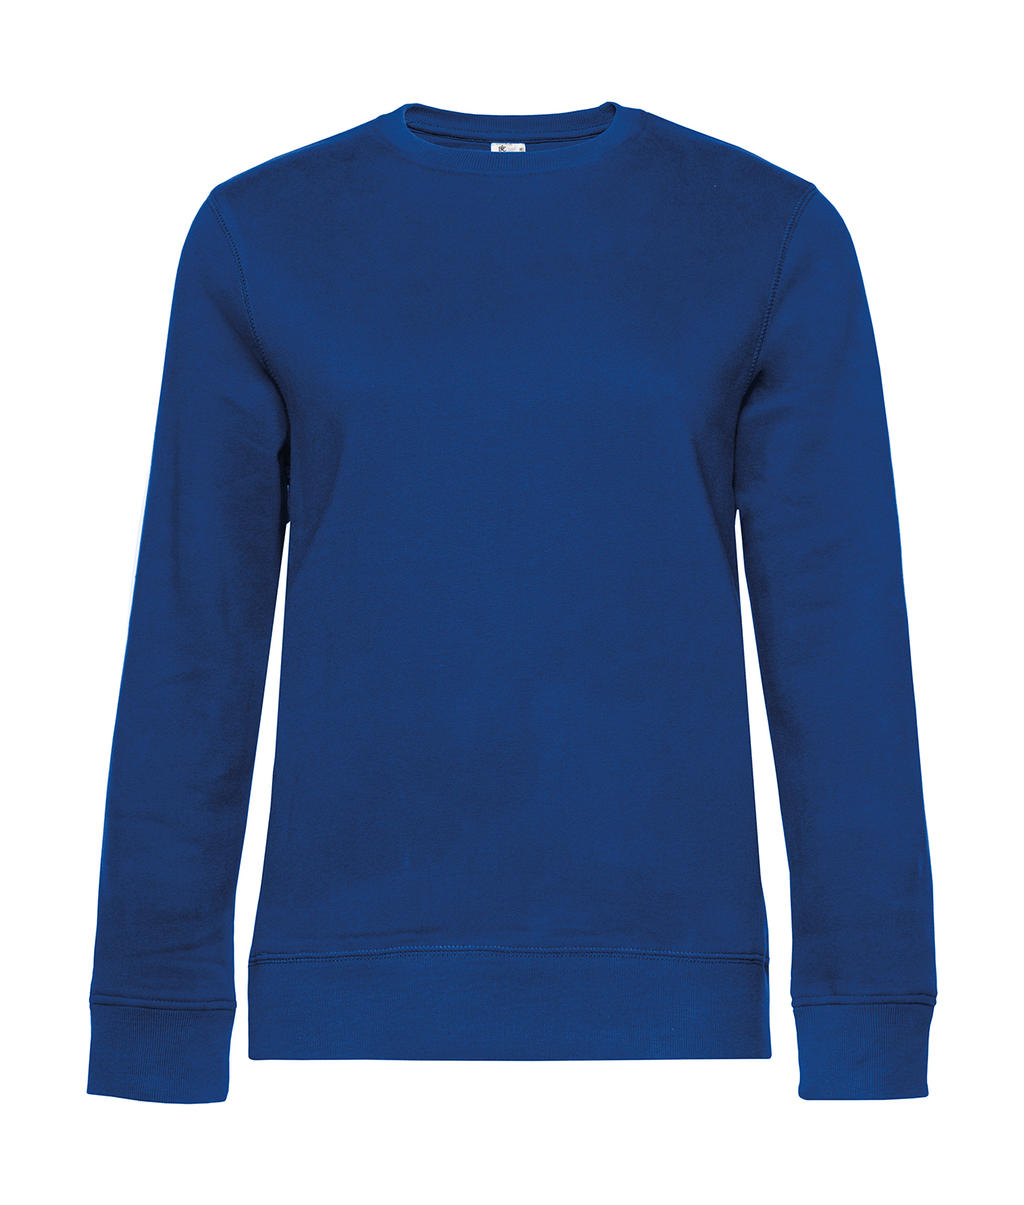  QUEEN Crew Neck_? in Farbe Royal